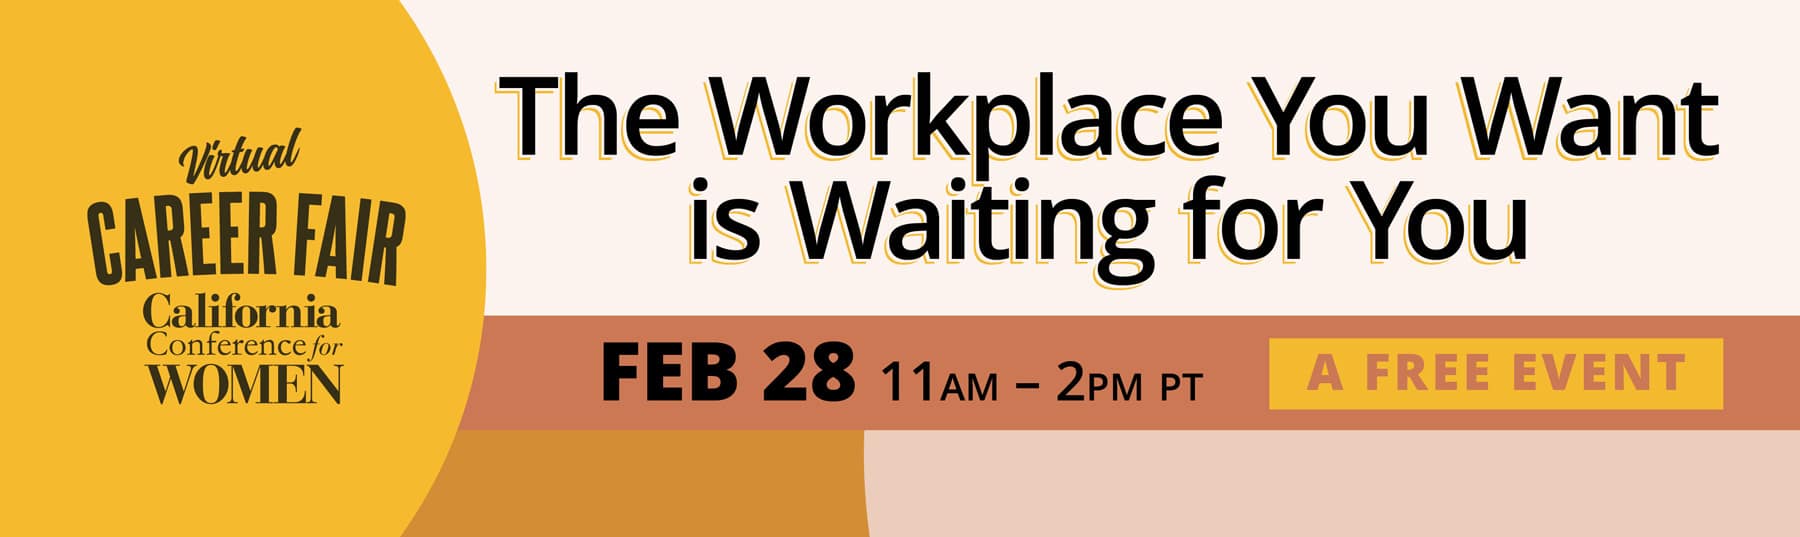 The workplace you want is waiting for you at the 2023 FREE Virtual Career Fair on February 28th!